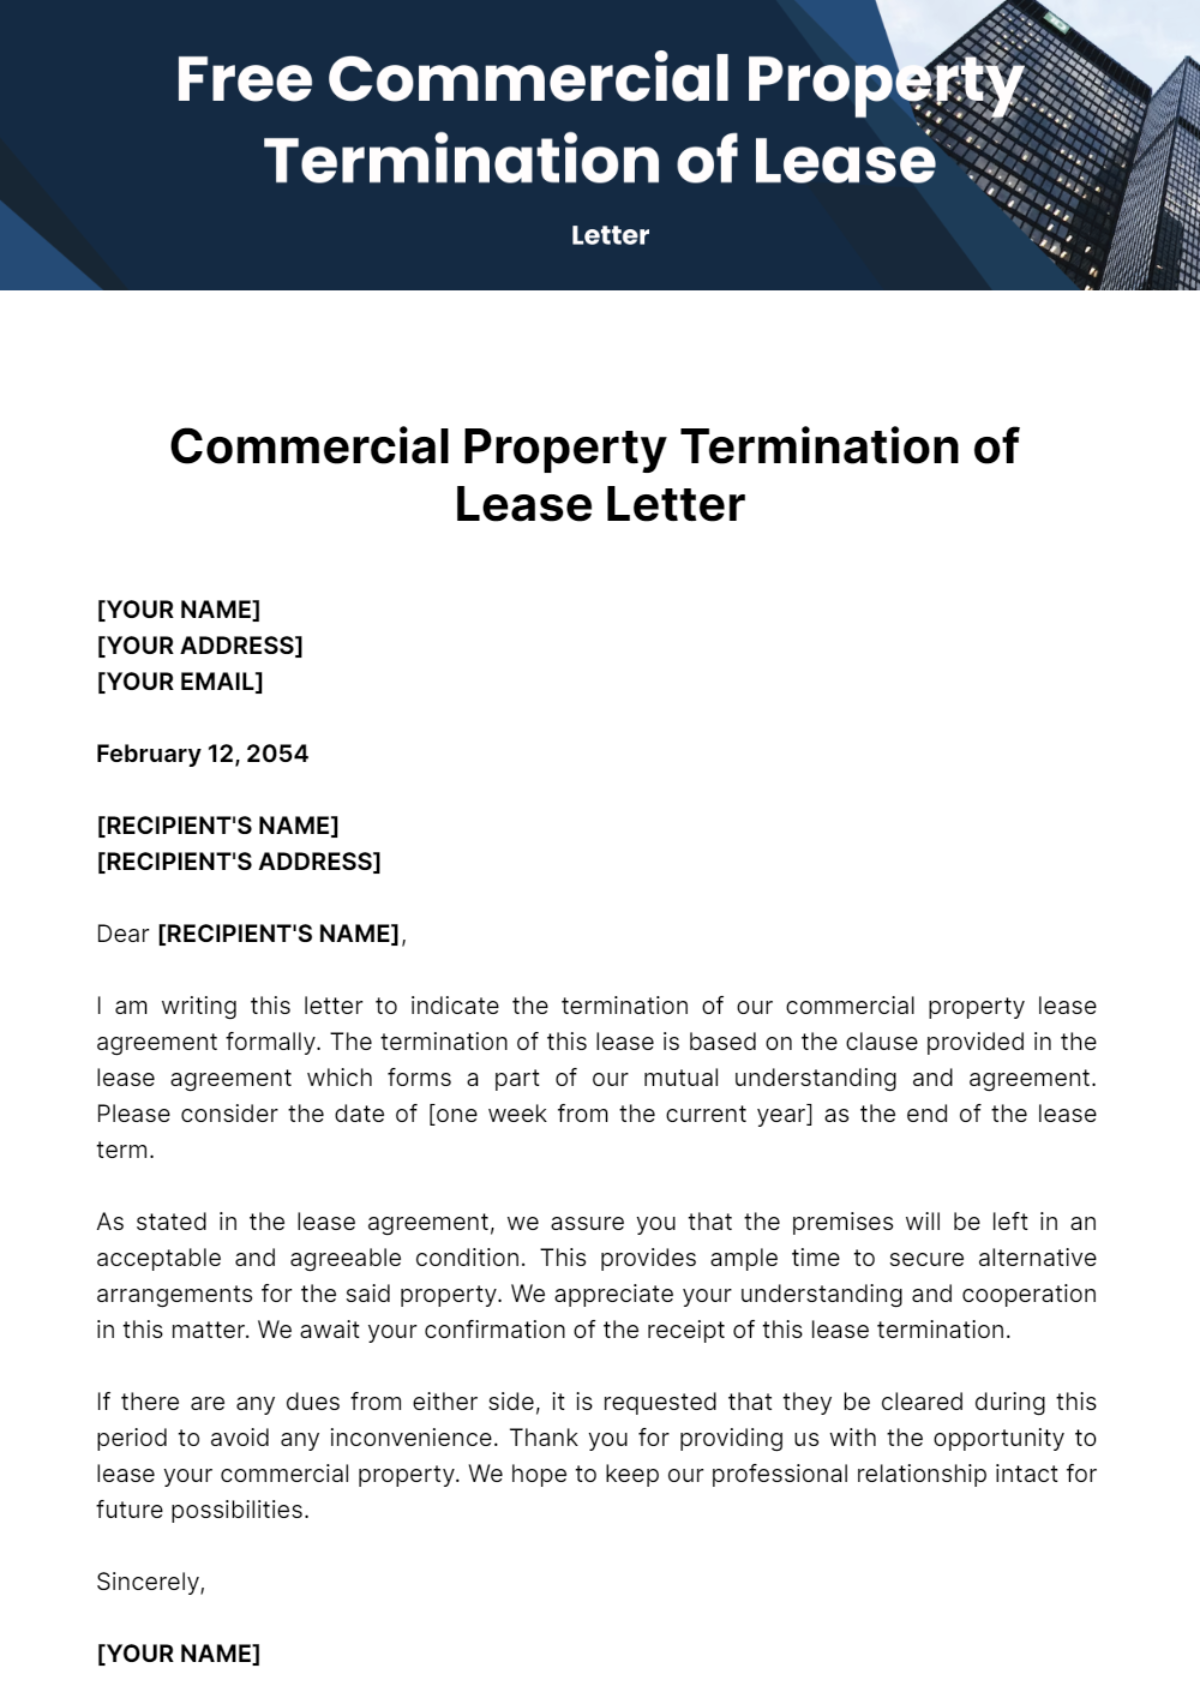 Free Commercial Property Termination of Lease Letter Template